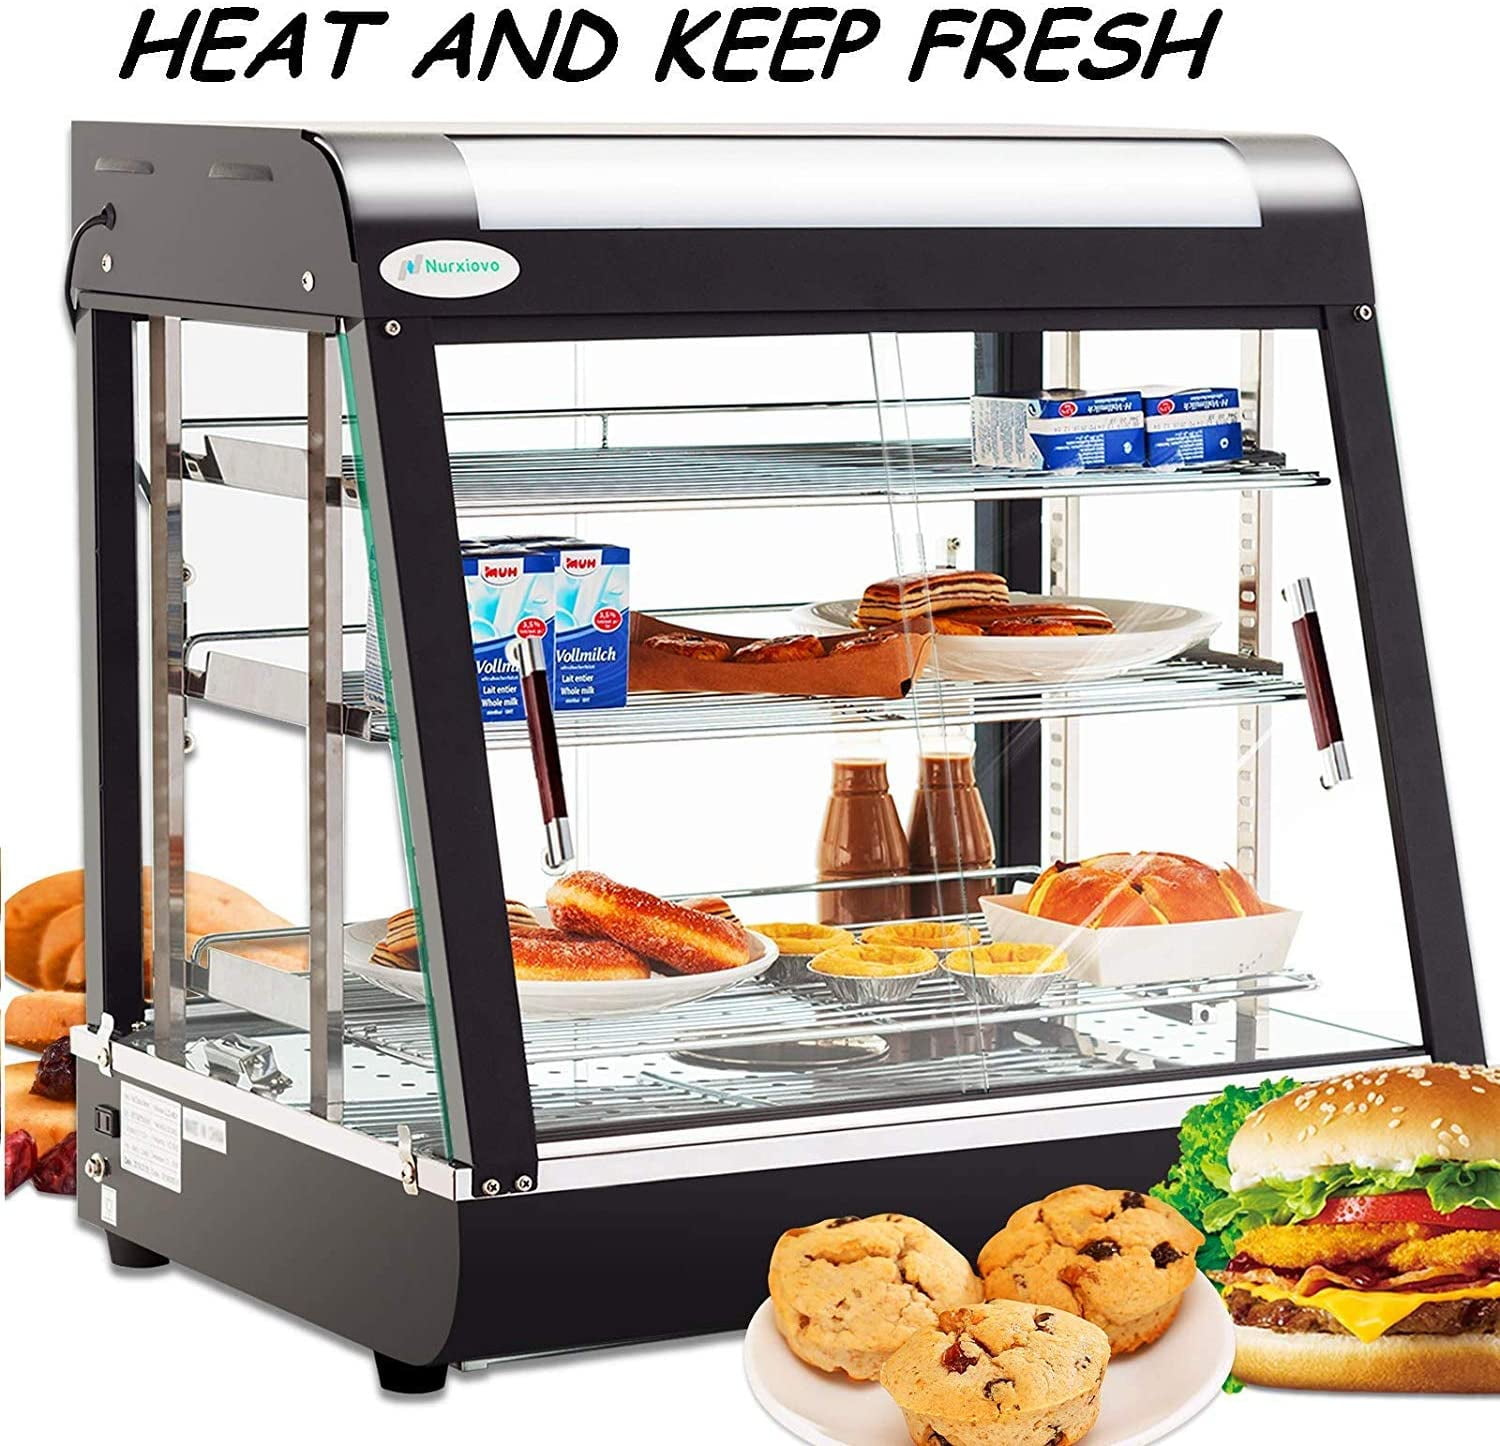 SUNCOO 27'' Commercial Food Warmer Display Hot Food Countertop Case Buffet  Restaurant Heated Cabinet 3 Tier Food Showcase for Catering Pizza Empanda  Pastry Patty Warmer 25-1/2 X 27 X 19inch 